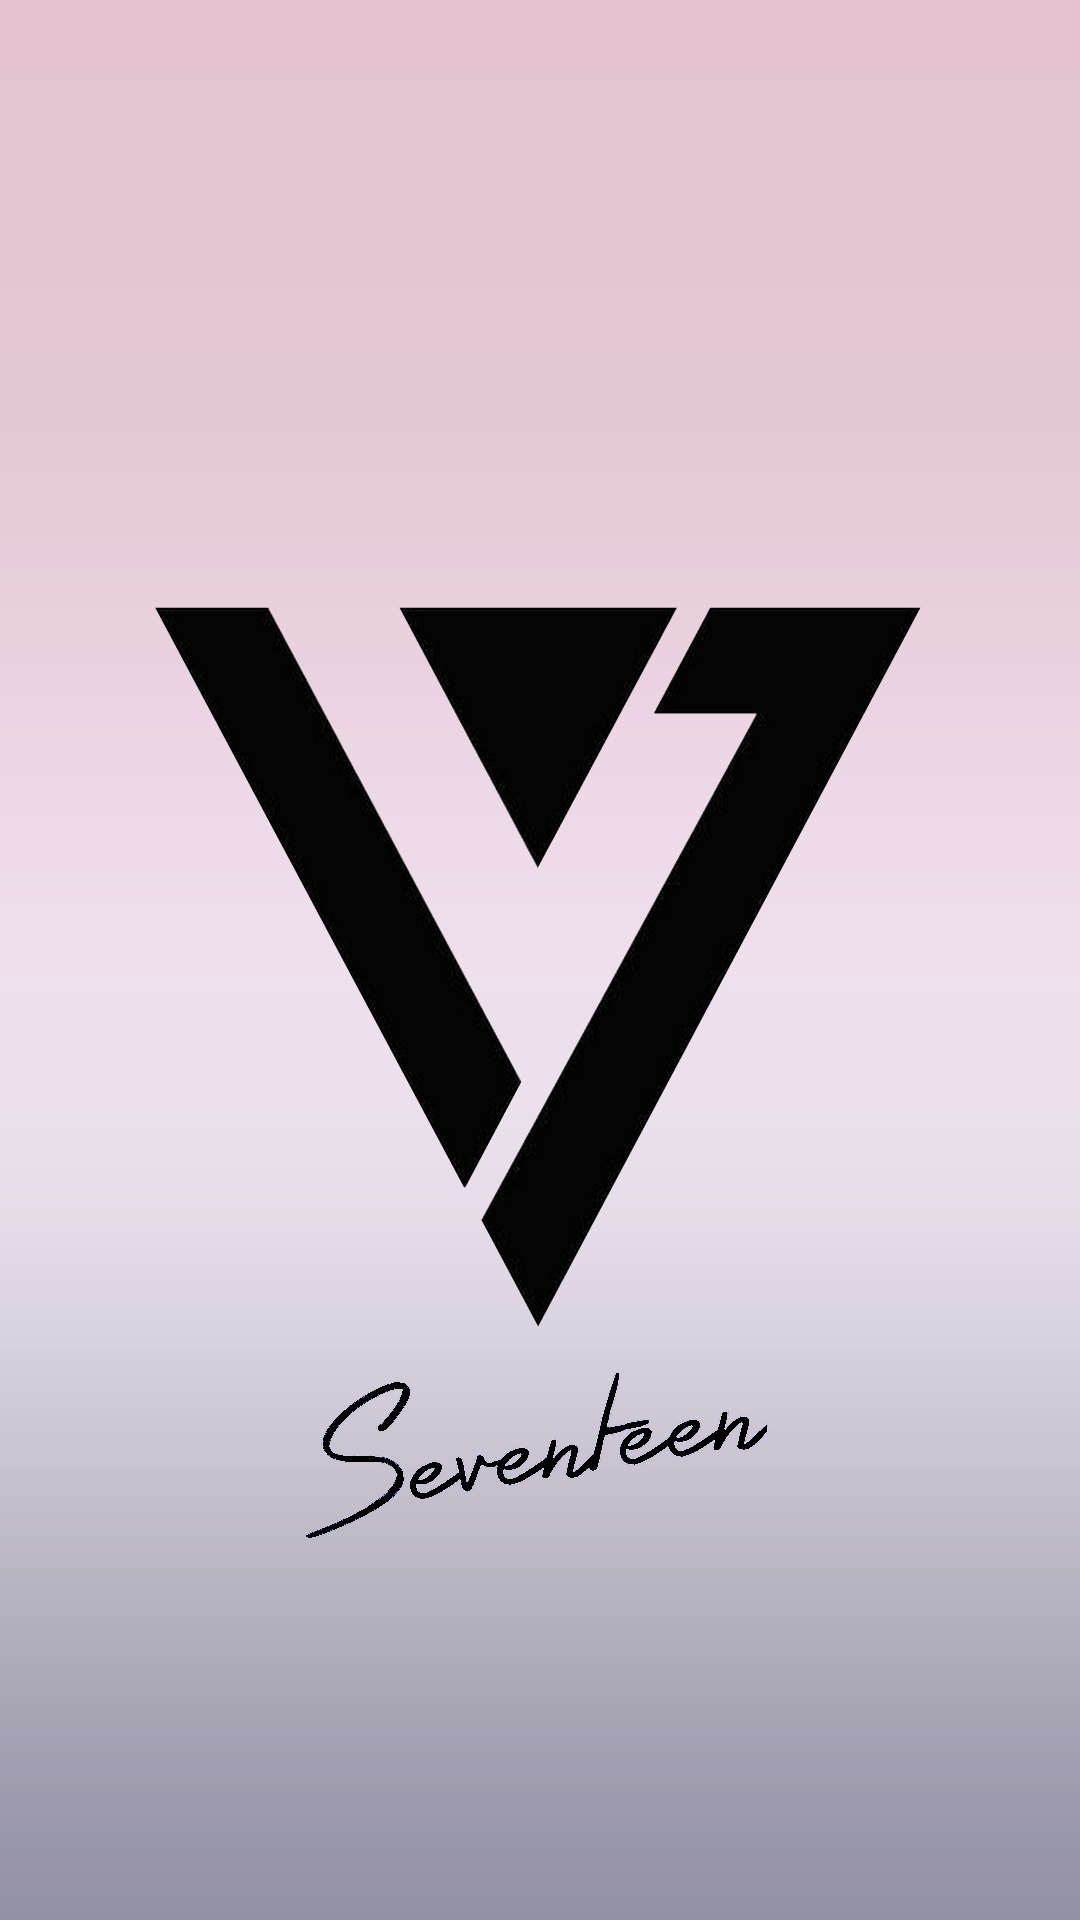 Seventeen wallpapers for phone